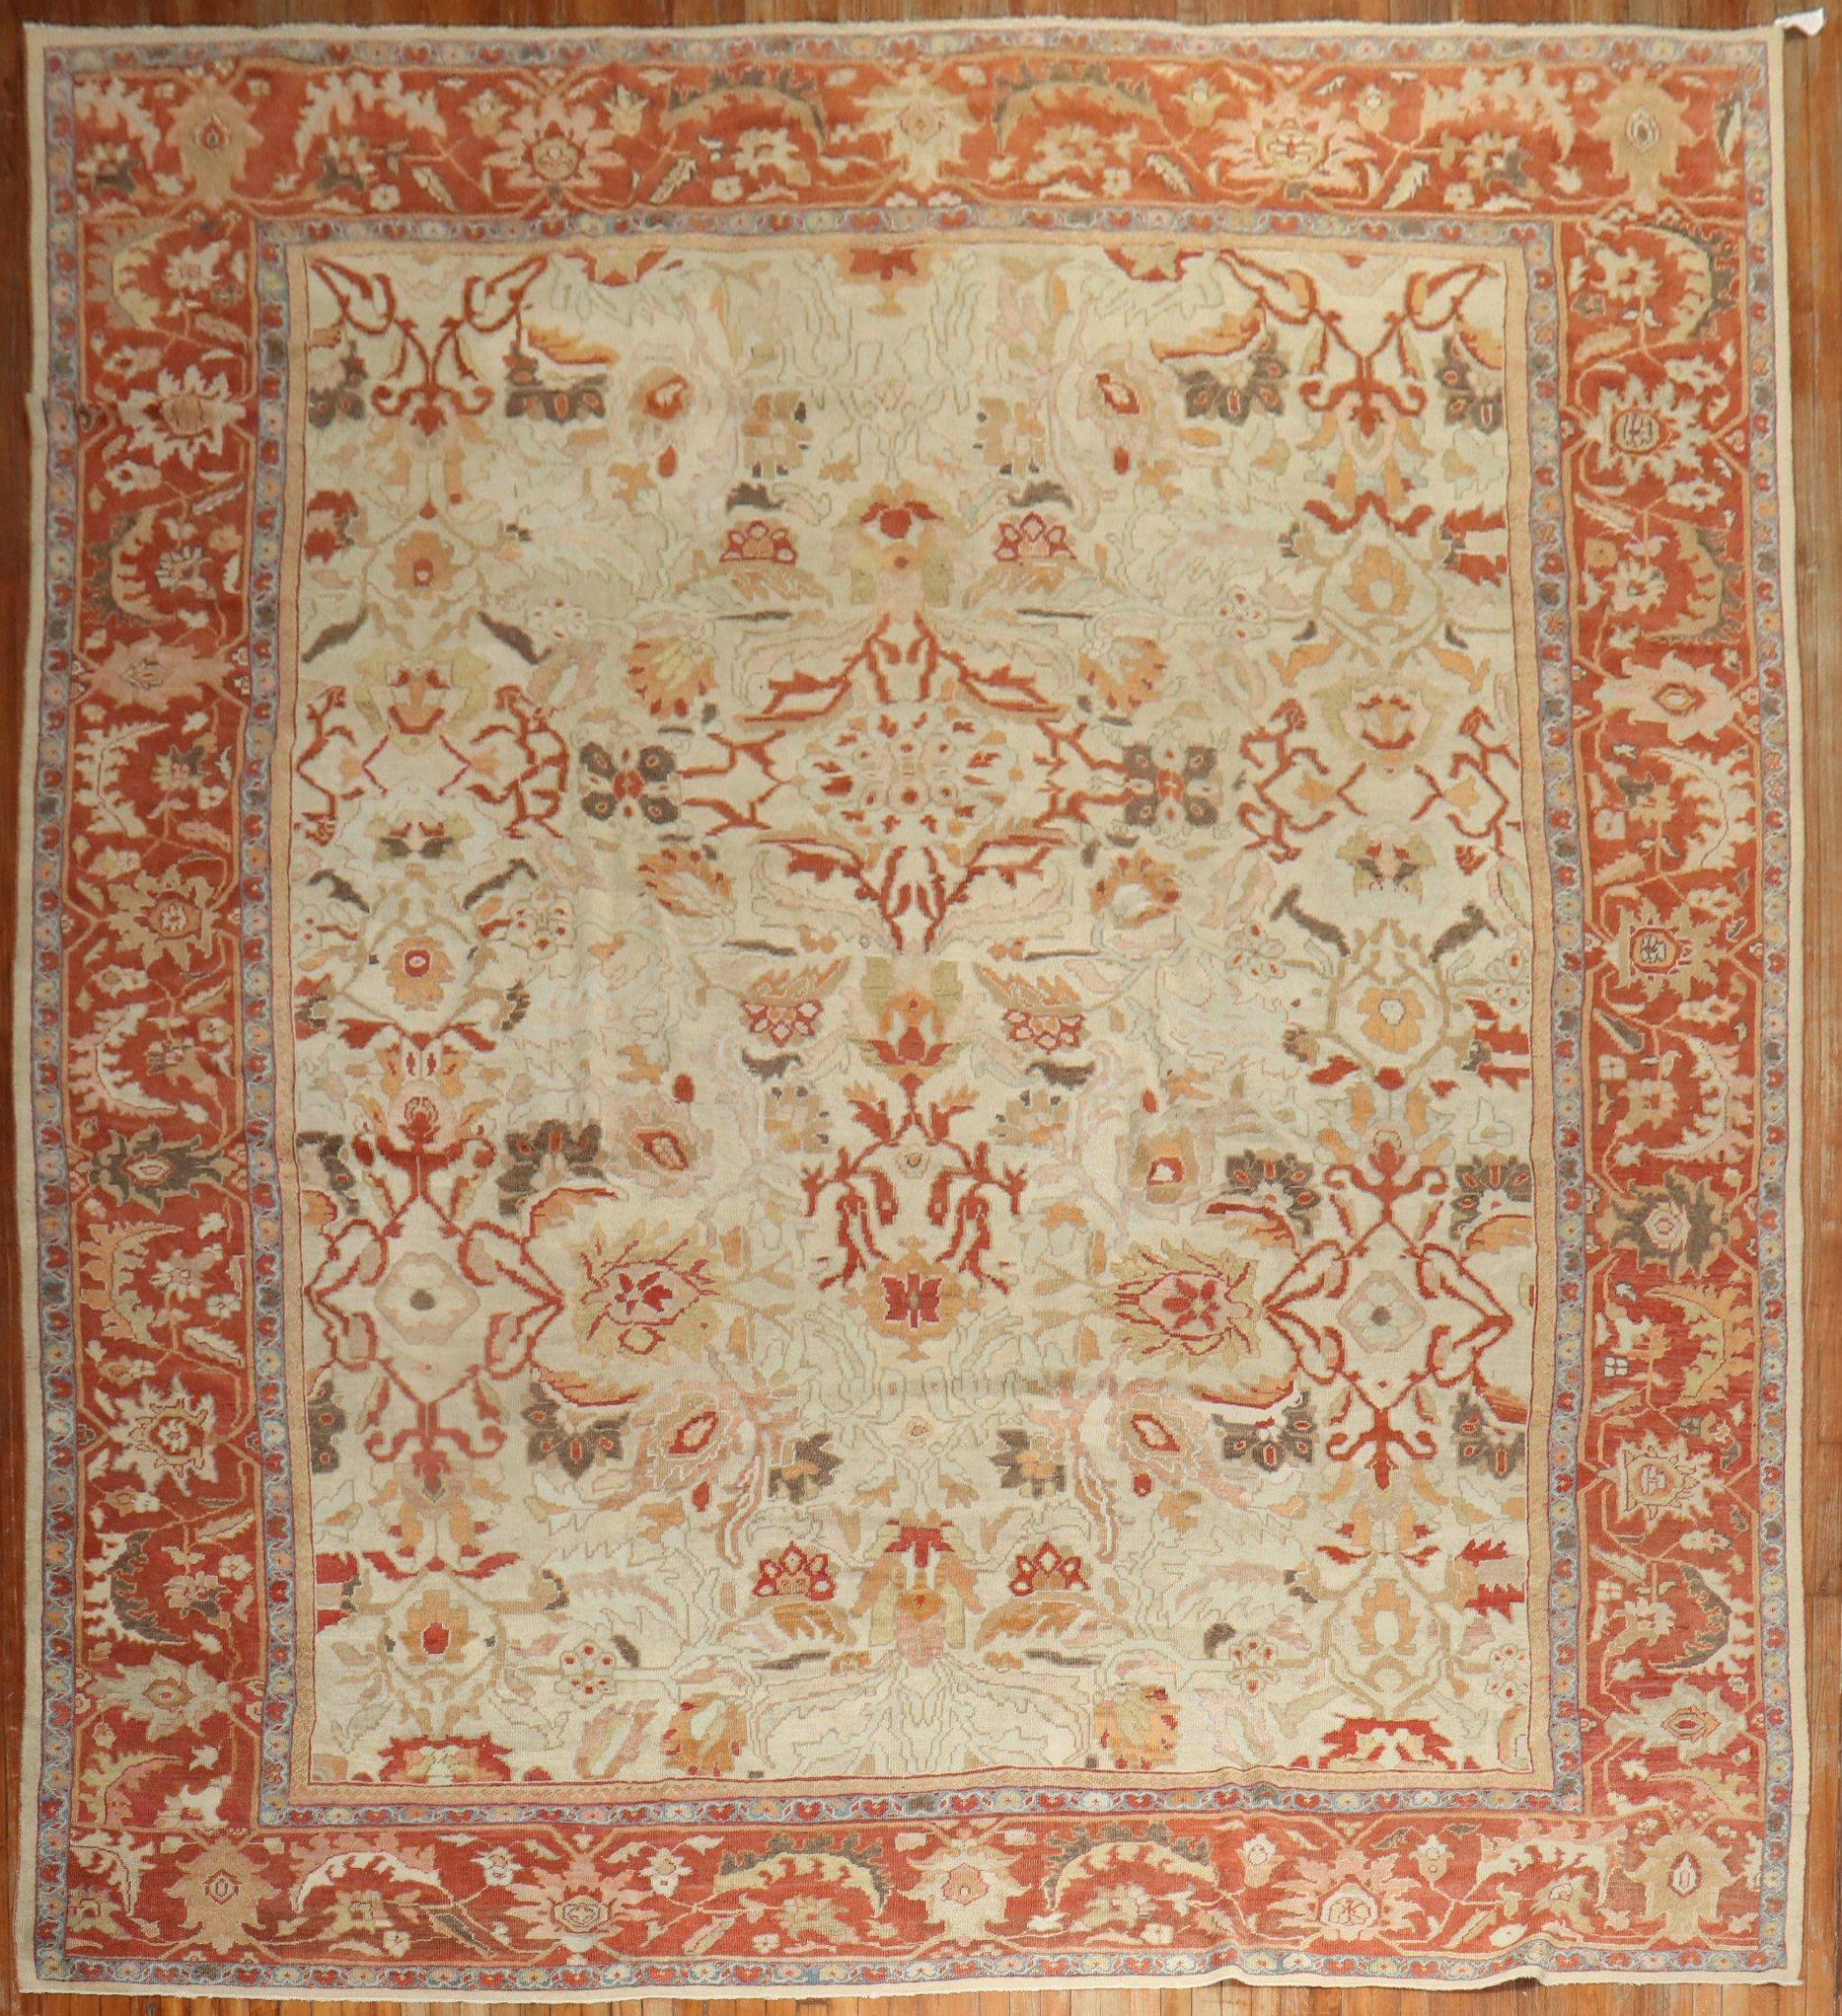 A connoisseur caliber late 19th century Persian Sultanabad carpet.

Measures: 11' x 13'6''

Woven in a series of villages in Western Central Iran, Sultanabad carpets employ over-scale, spacious all-over patterns that are highly prized for their